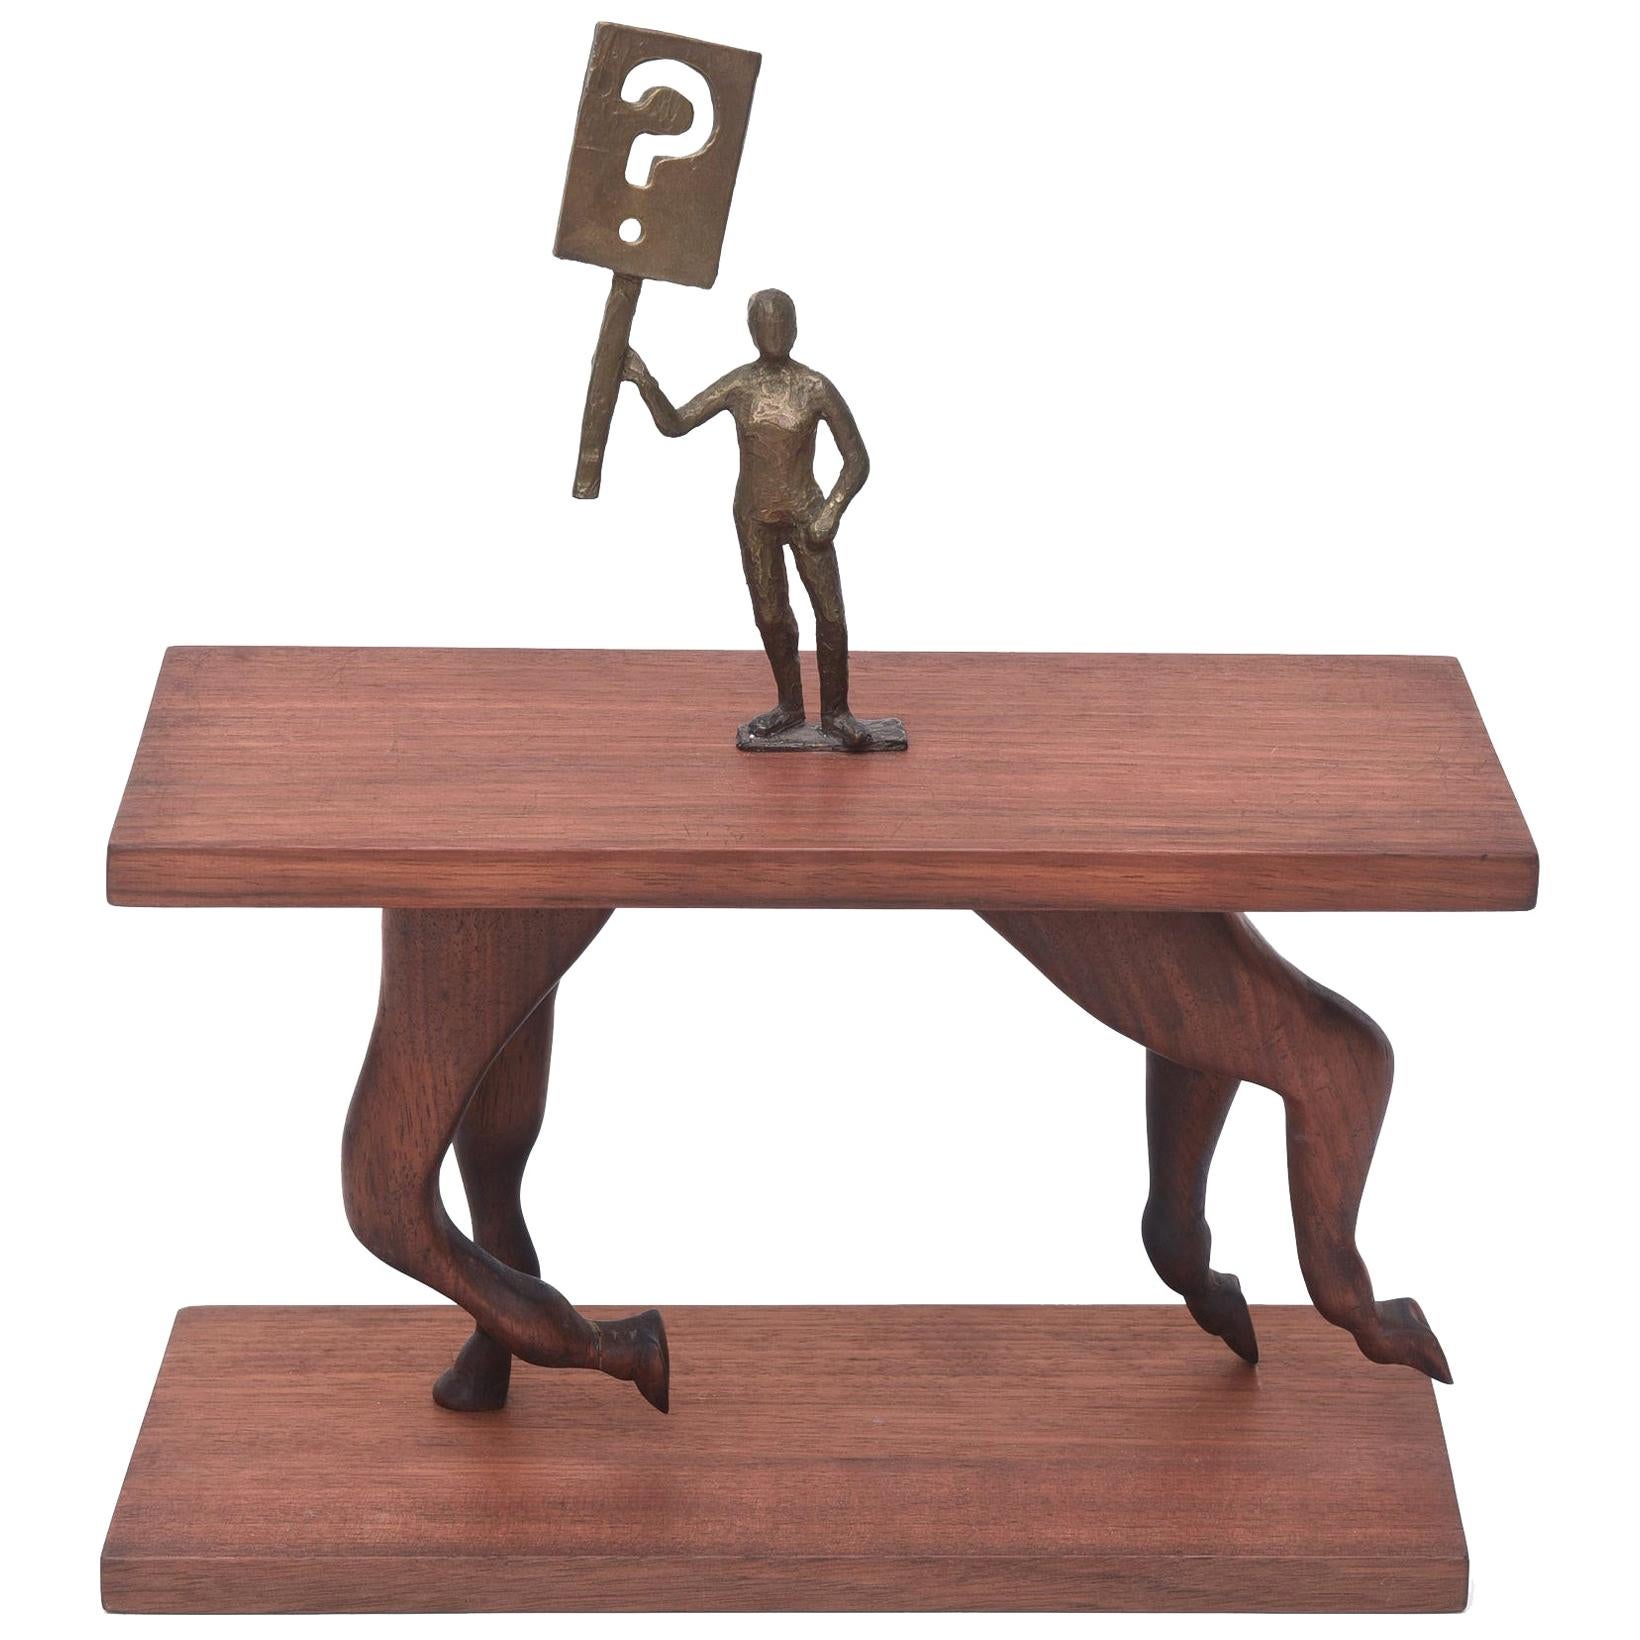 One of a Kind Signed Bronze on Wood Sculpture Titled "Ask a Question"